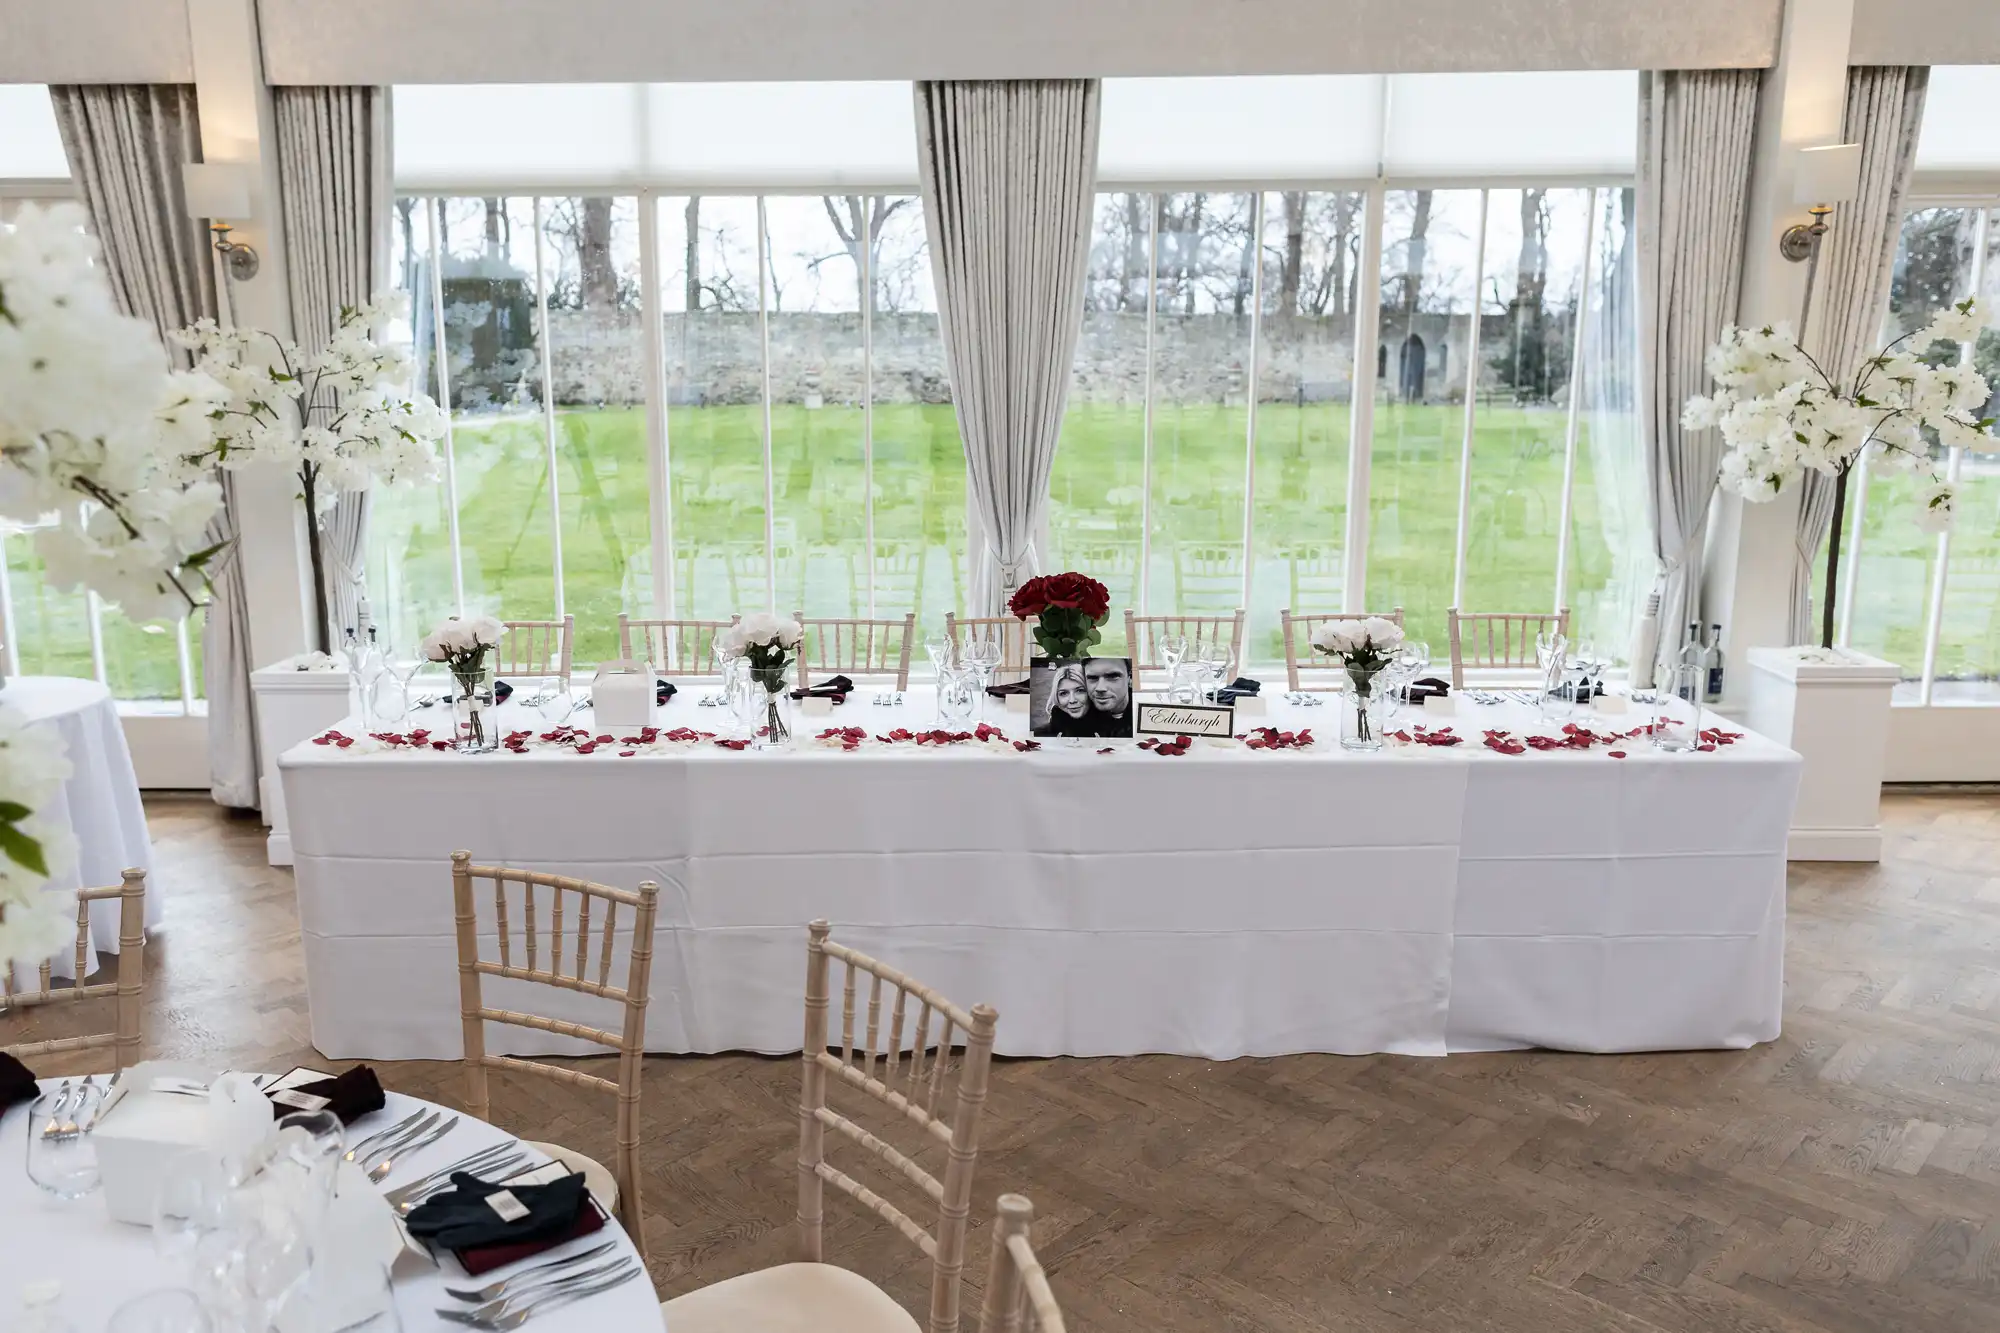 A long white-clothed table in a decorated event room, with red and white floral centerpieces, arranged chairs, and large windows in the background overlooking a grassy area and trees.